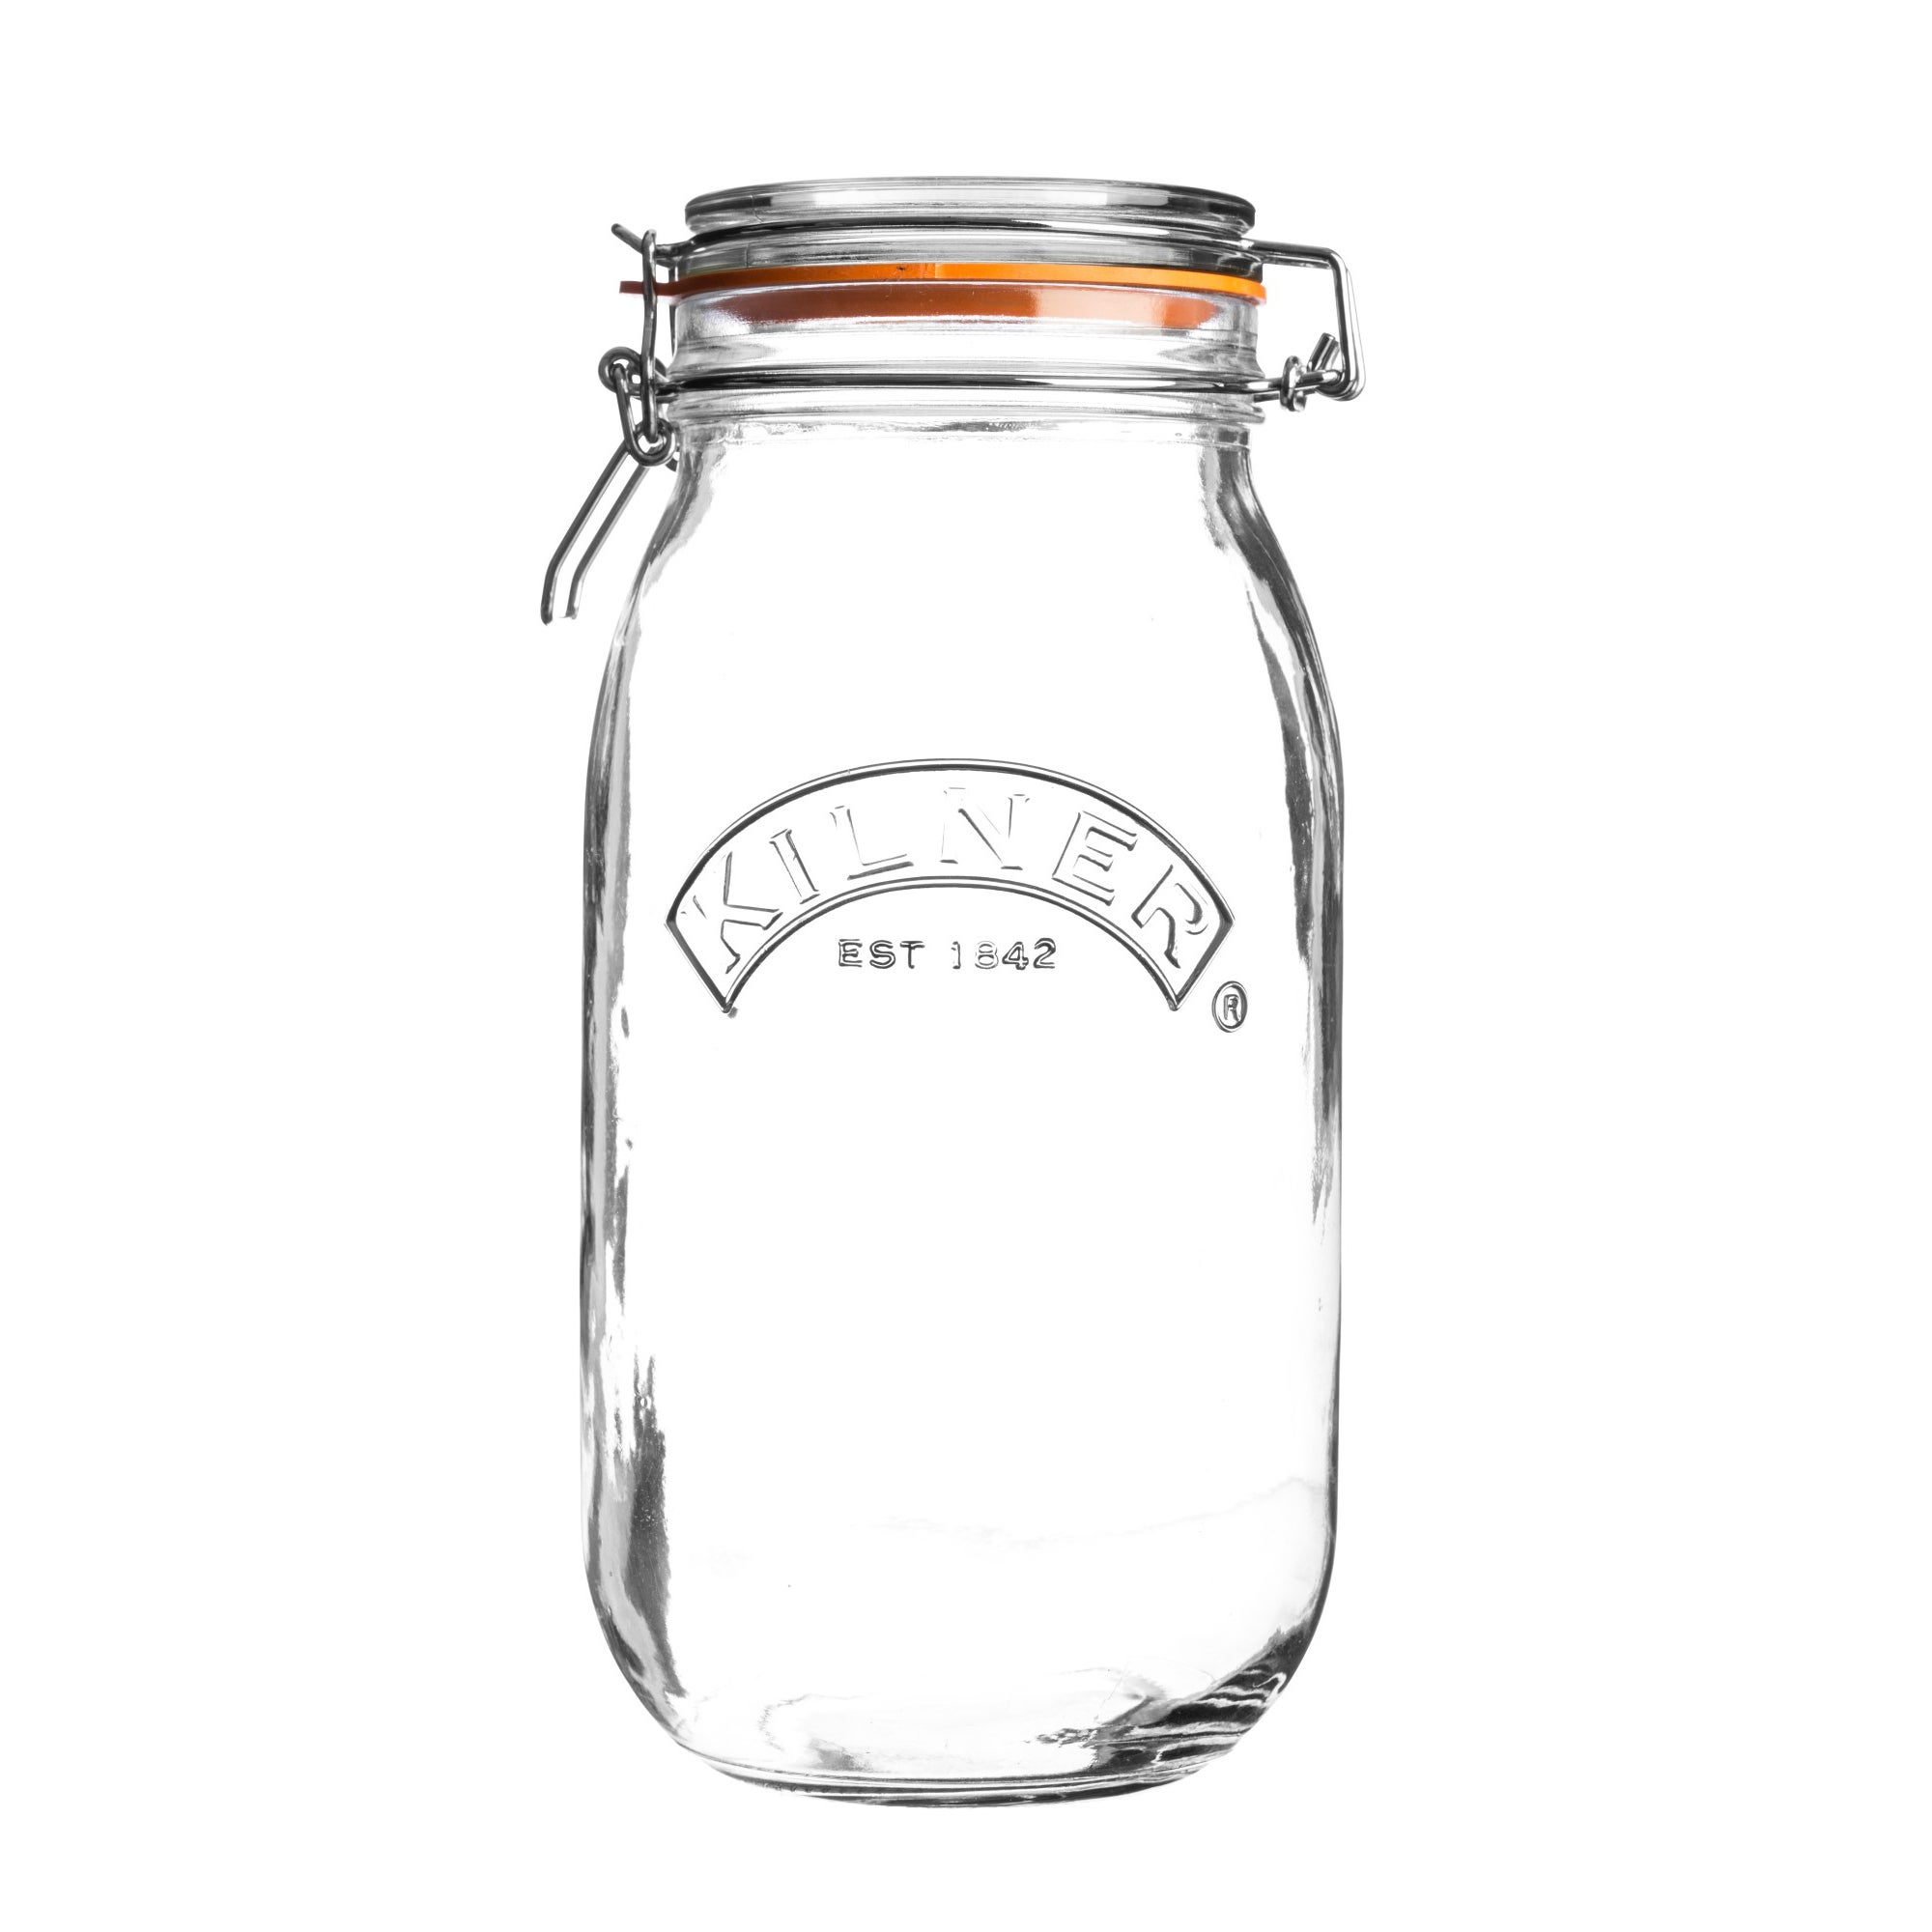 Ball Mason Jars 16 oz Bundle with Non Slip Jar Opener Set of 6 - 16 Ounce  Size Mason Jars with Regular Mouth - Canning Glass Jars with Lids, Heritage